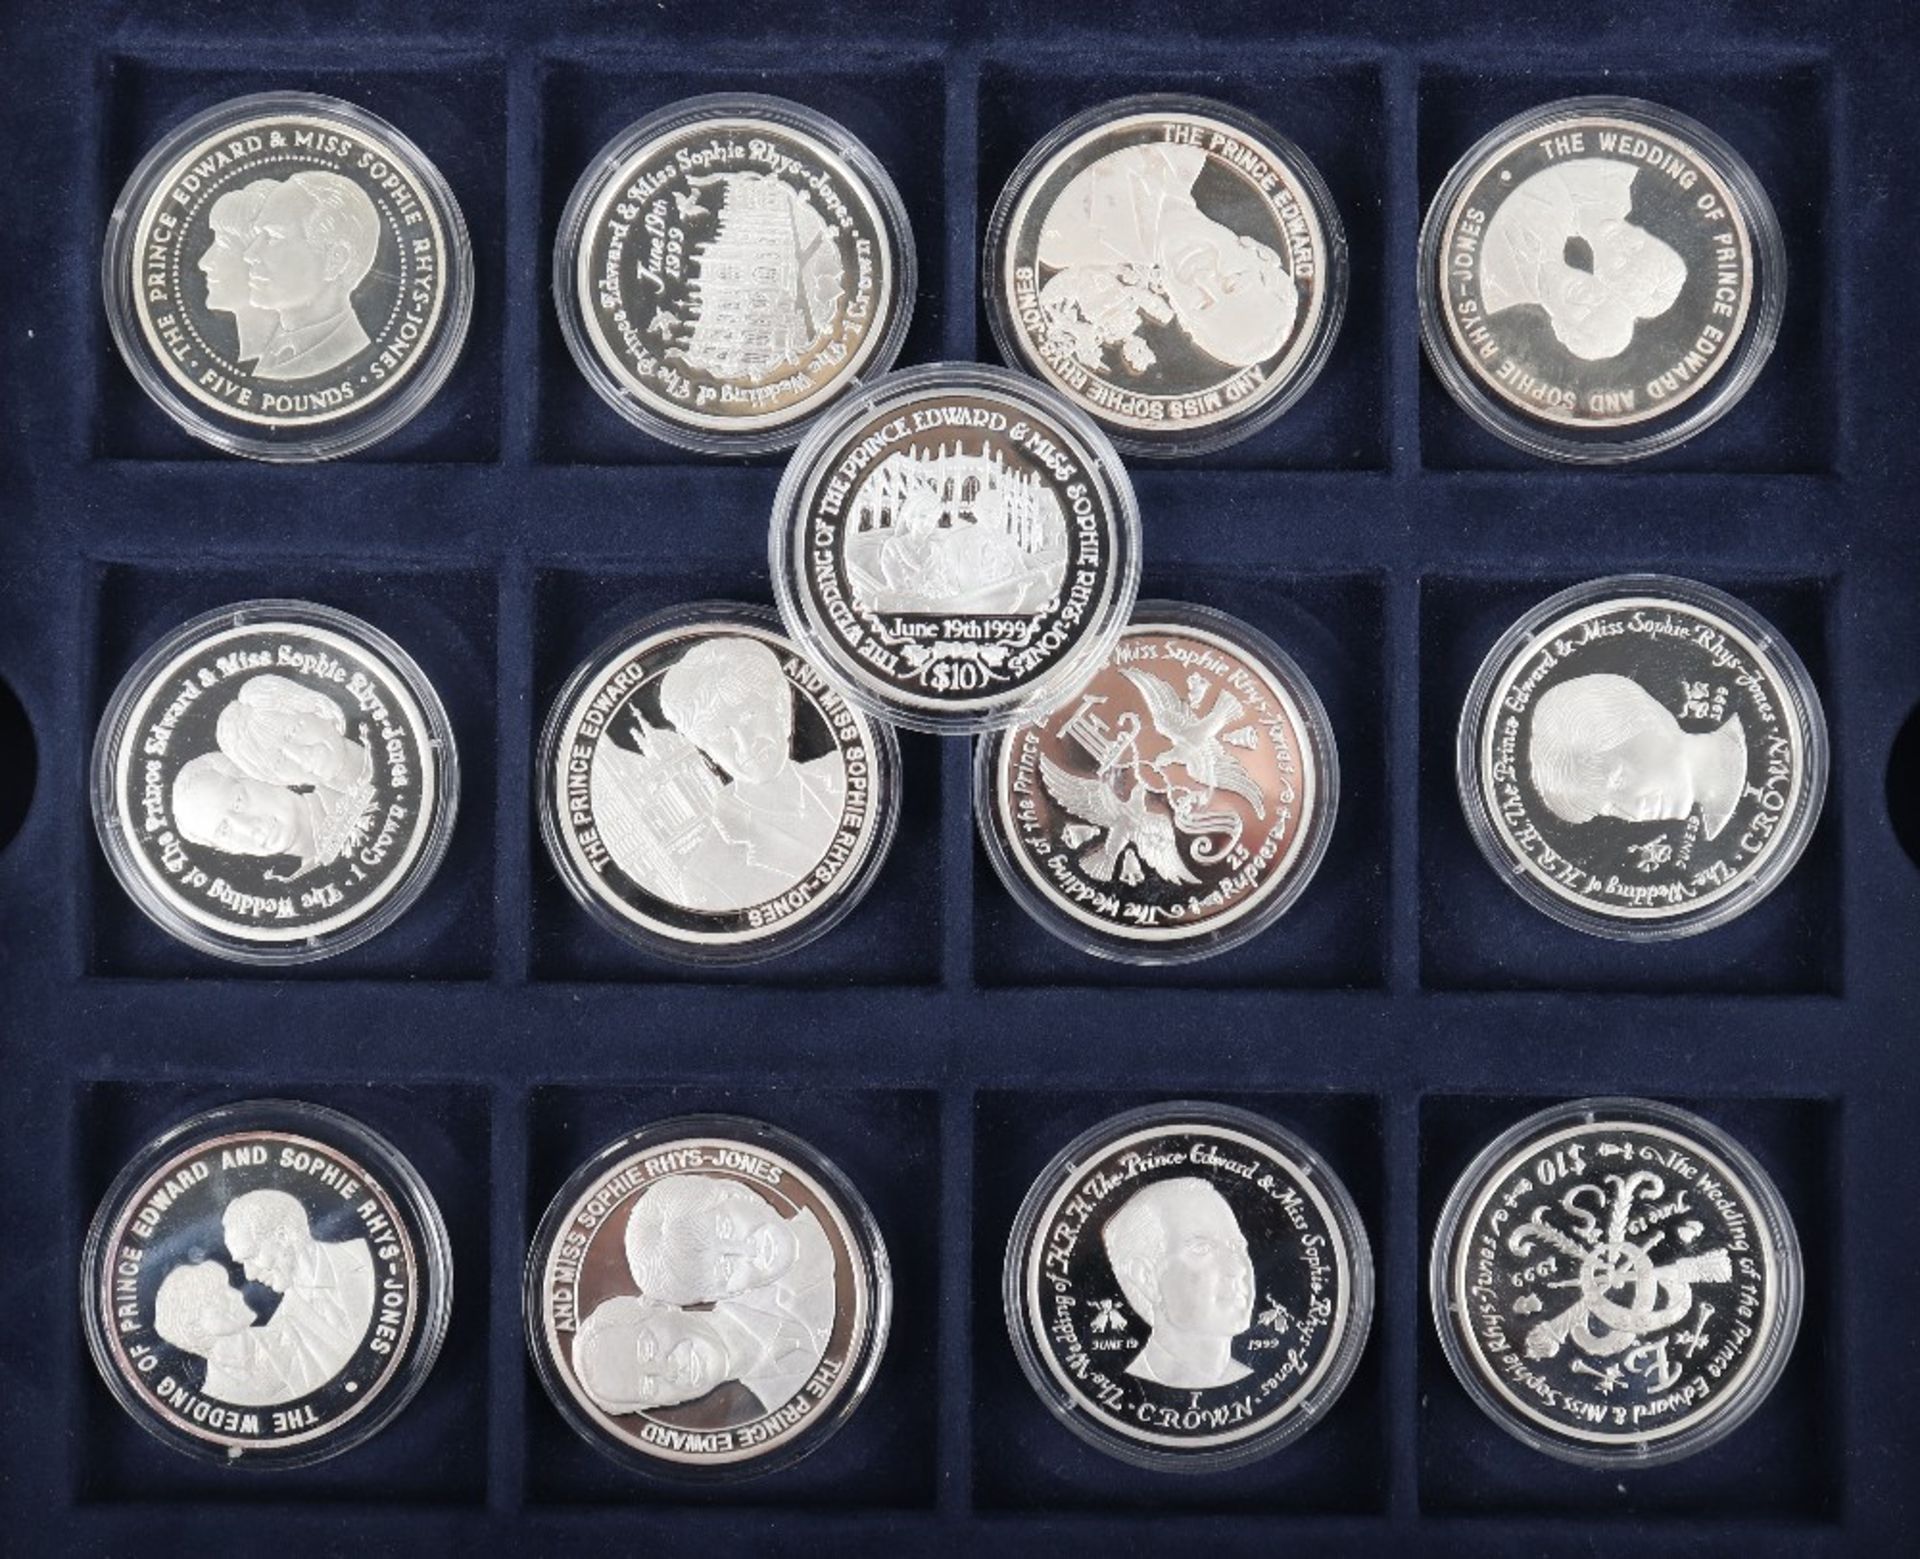 The Prince Edward & Miss Sophie Rhys-Jones silver coin collection - Image 2 of 3